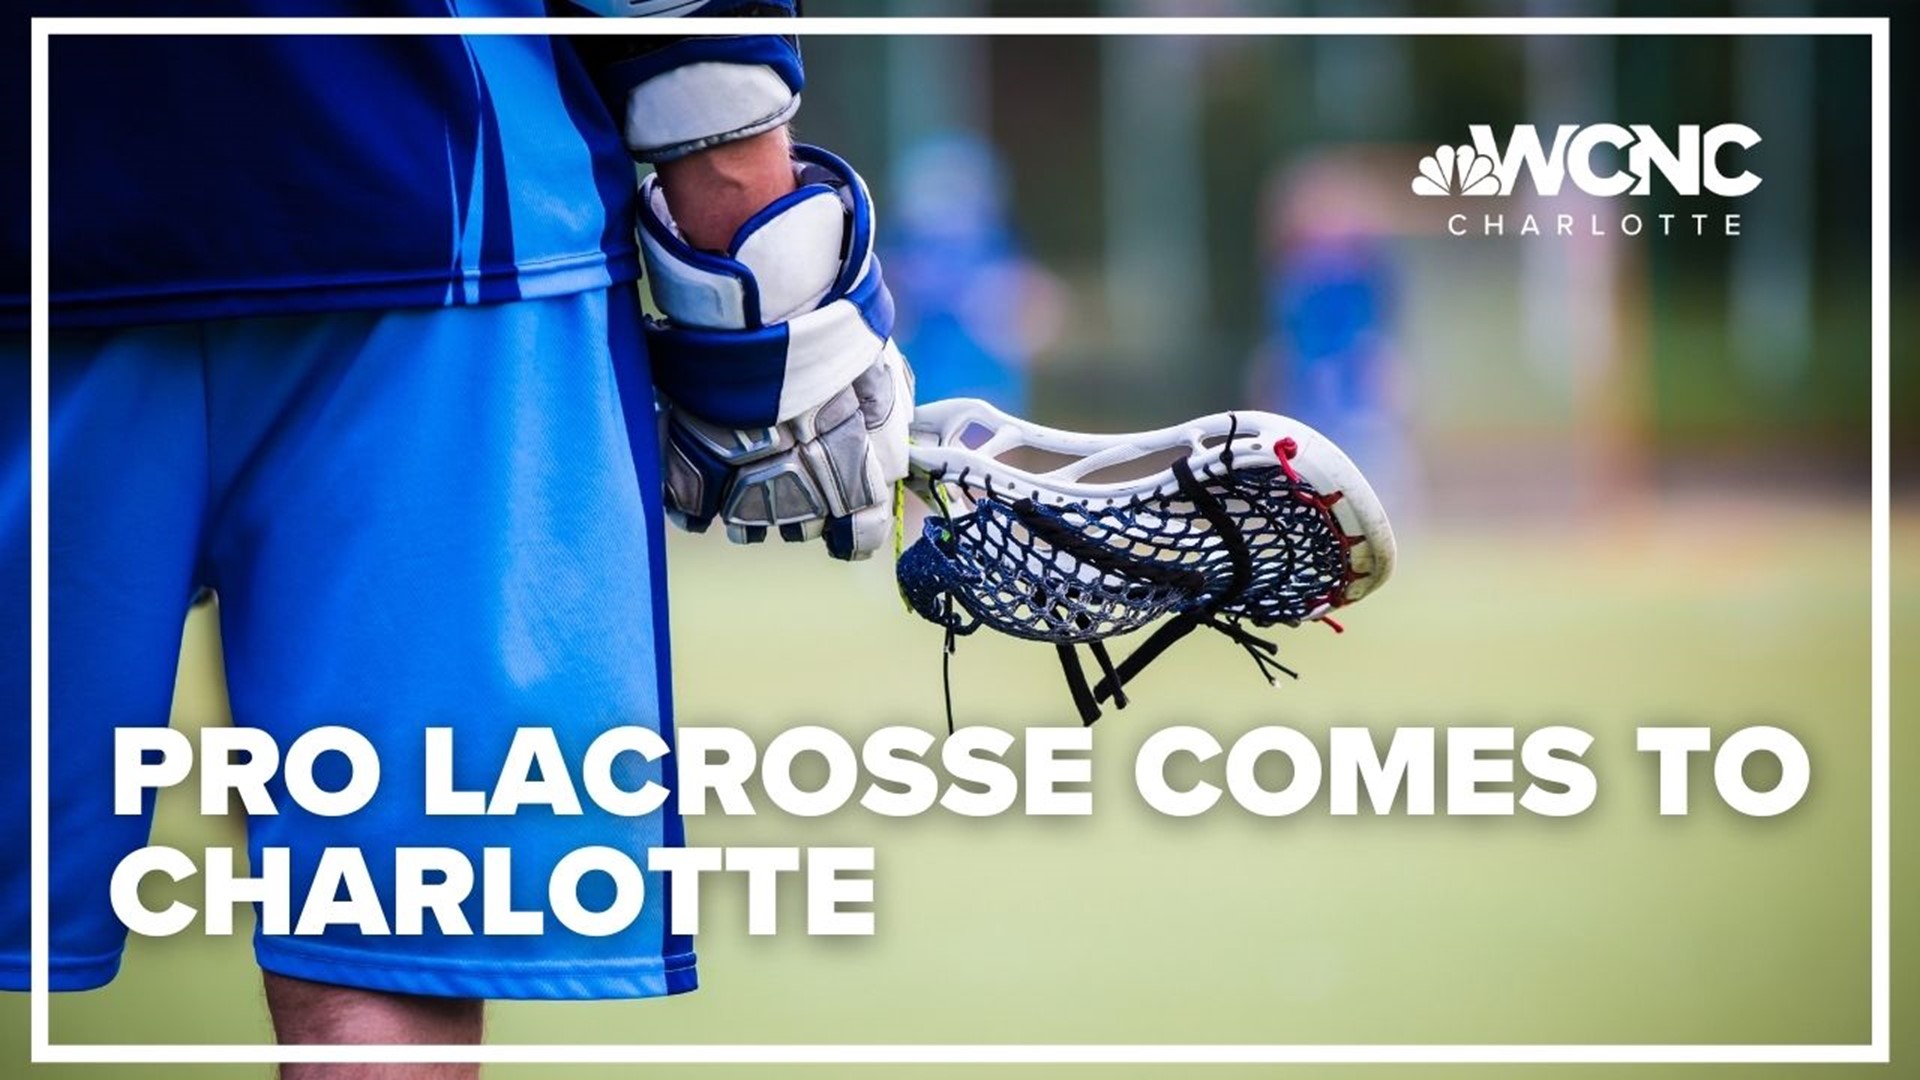 The Premier Lacrosse League makes its Charlotte debut this weekend as the sport's popularity booms across North Carolina.